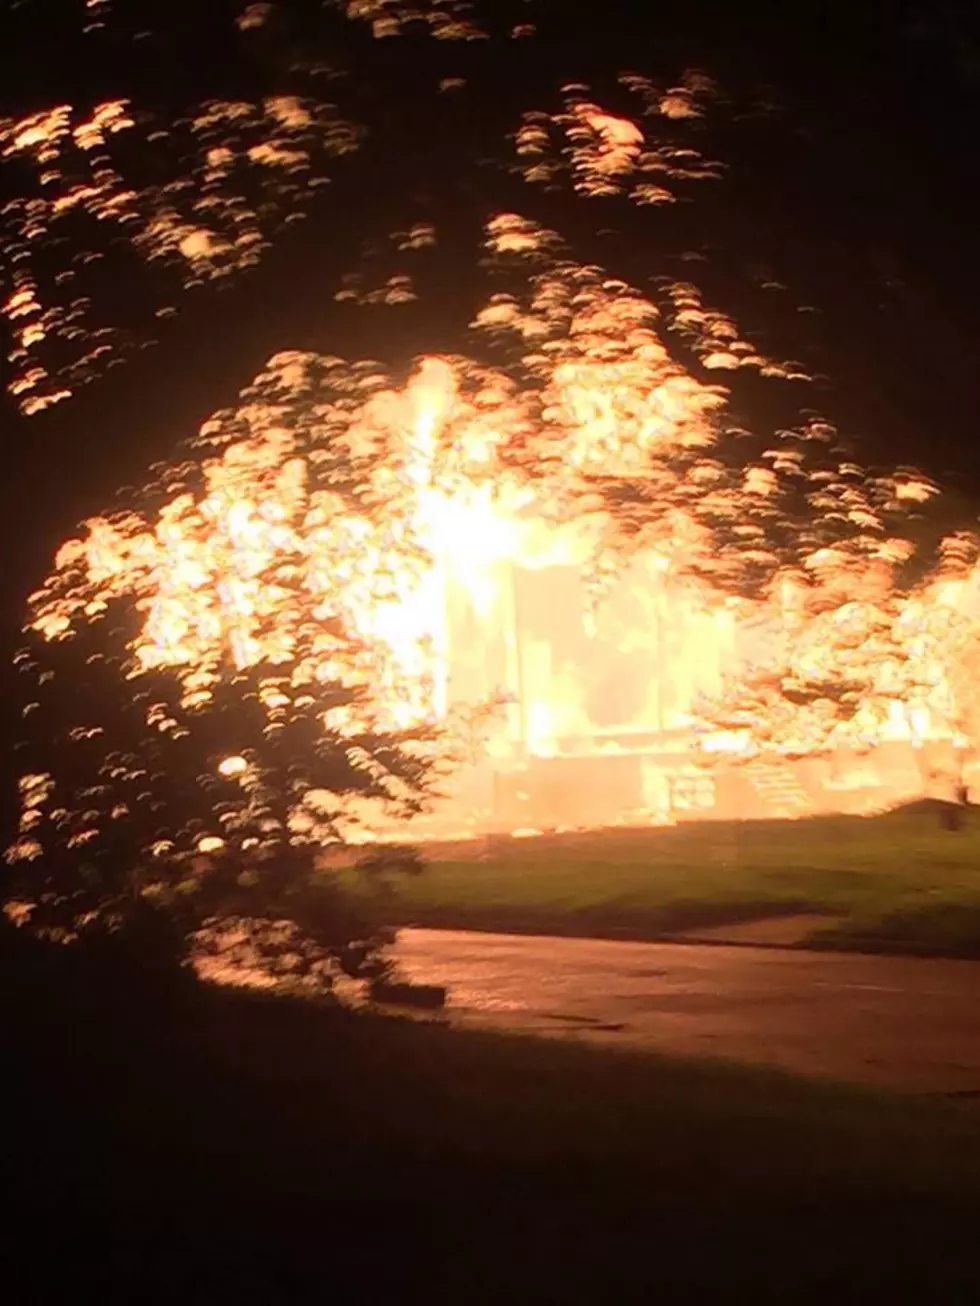 Old Governor’s Mansion Burns Down In Apparent Arson